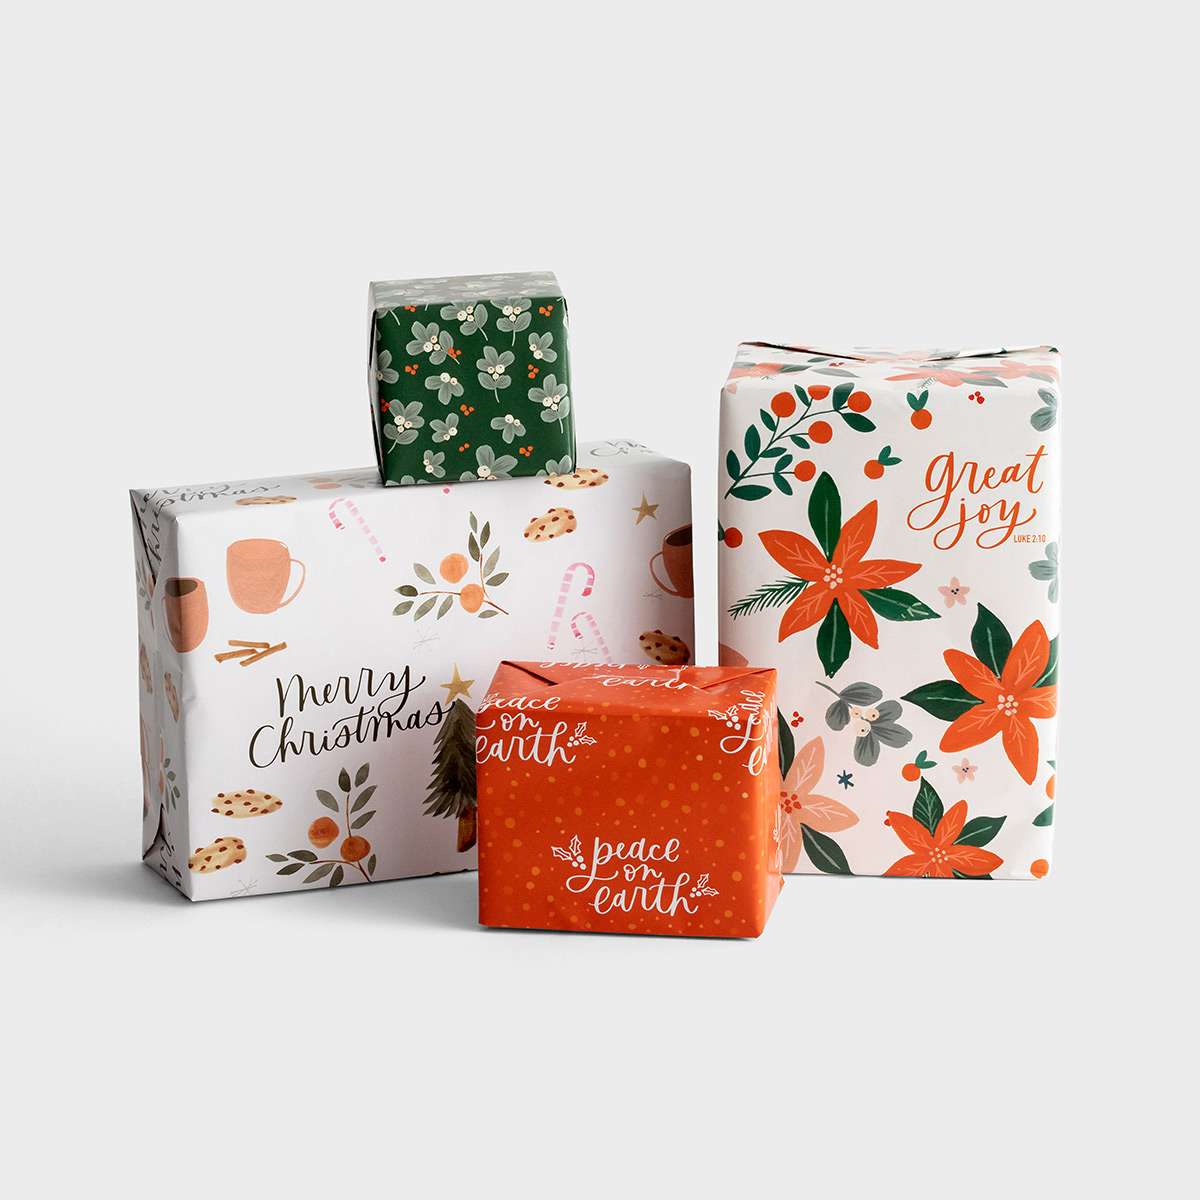 Studio 71 - Festive Florals - Holiday Helper and Wrapping Paper Bundle